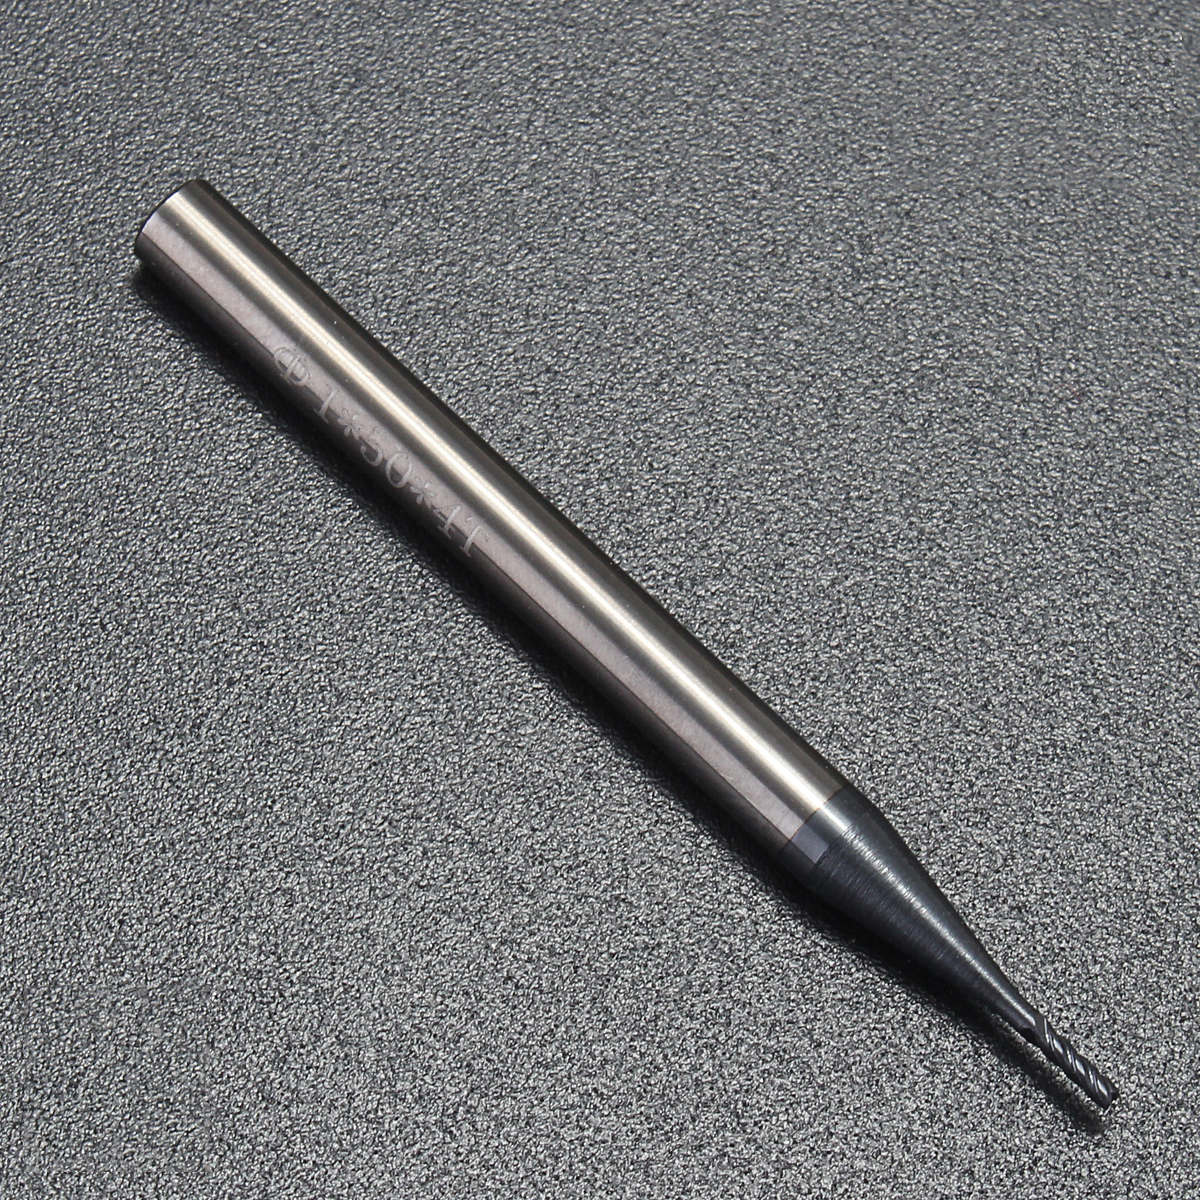 Drillpro-1mm-4-Flutes-End-Mill-Cutter-50mm-Length-Tungsten-Carbide-Milling-Cutter-CNC-Tool-1516233-8